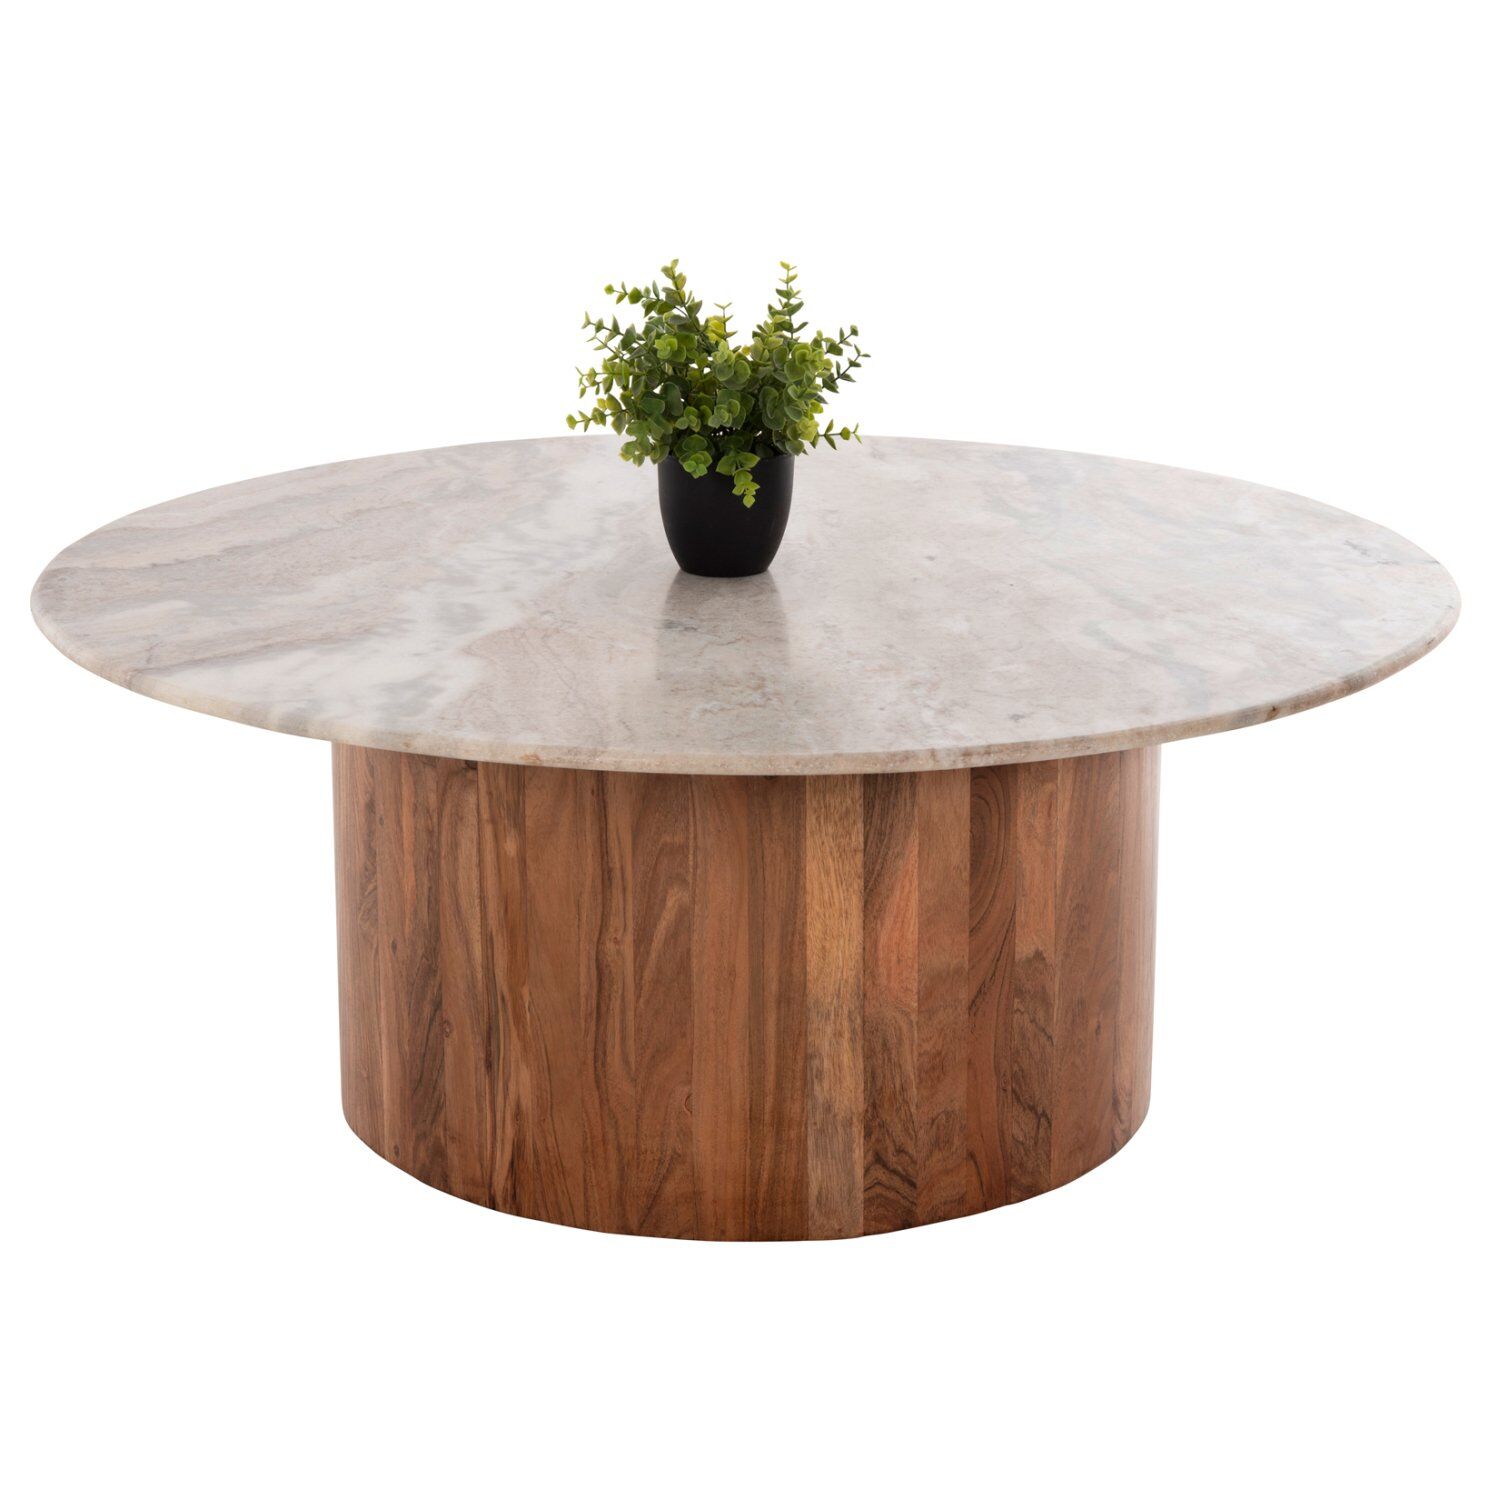 COFFEE TABLE FORMEL HM9671 ACACIA WOOD IN NATURAL-WHITE MARBLE TOP Φ100x40Hcm.